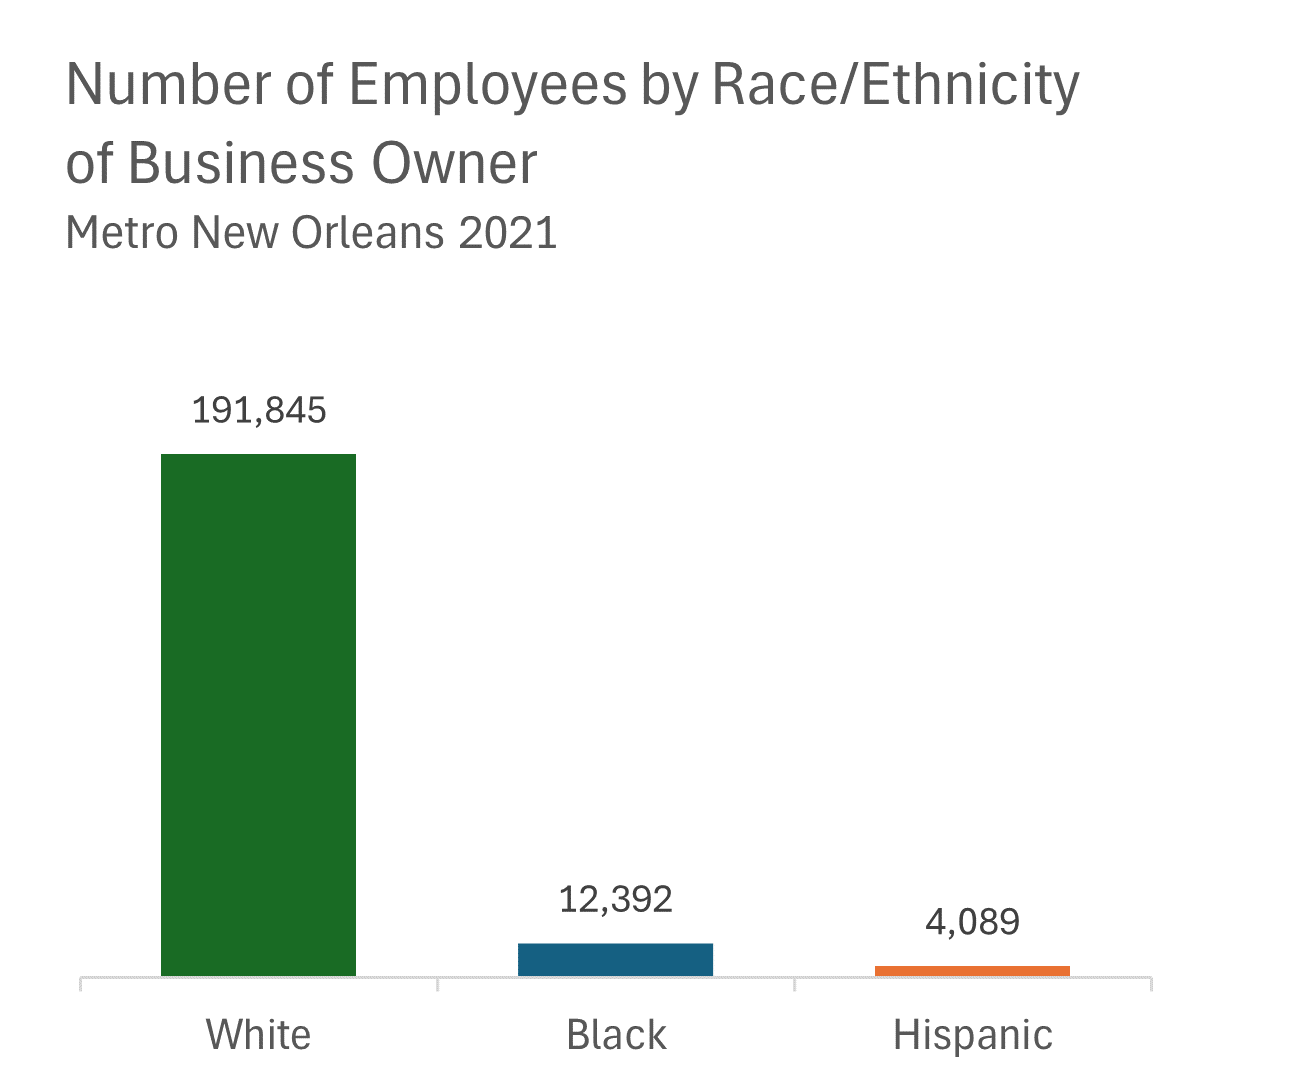 Number of Employees by Race/Ethnicity of Business Owner